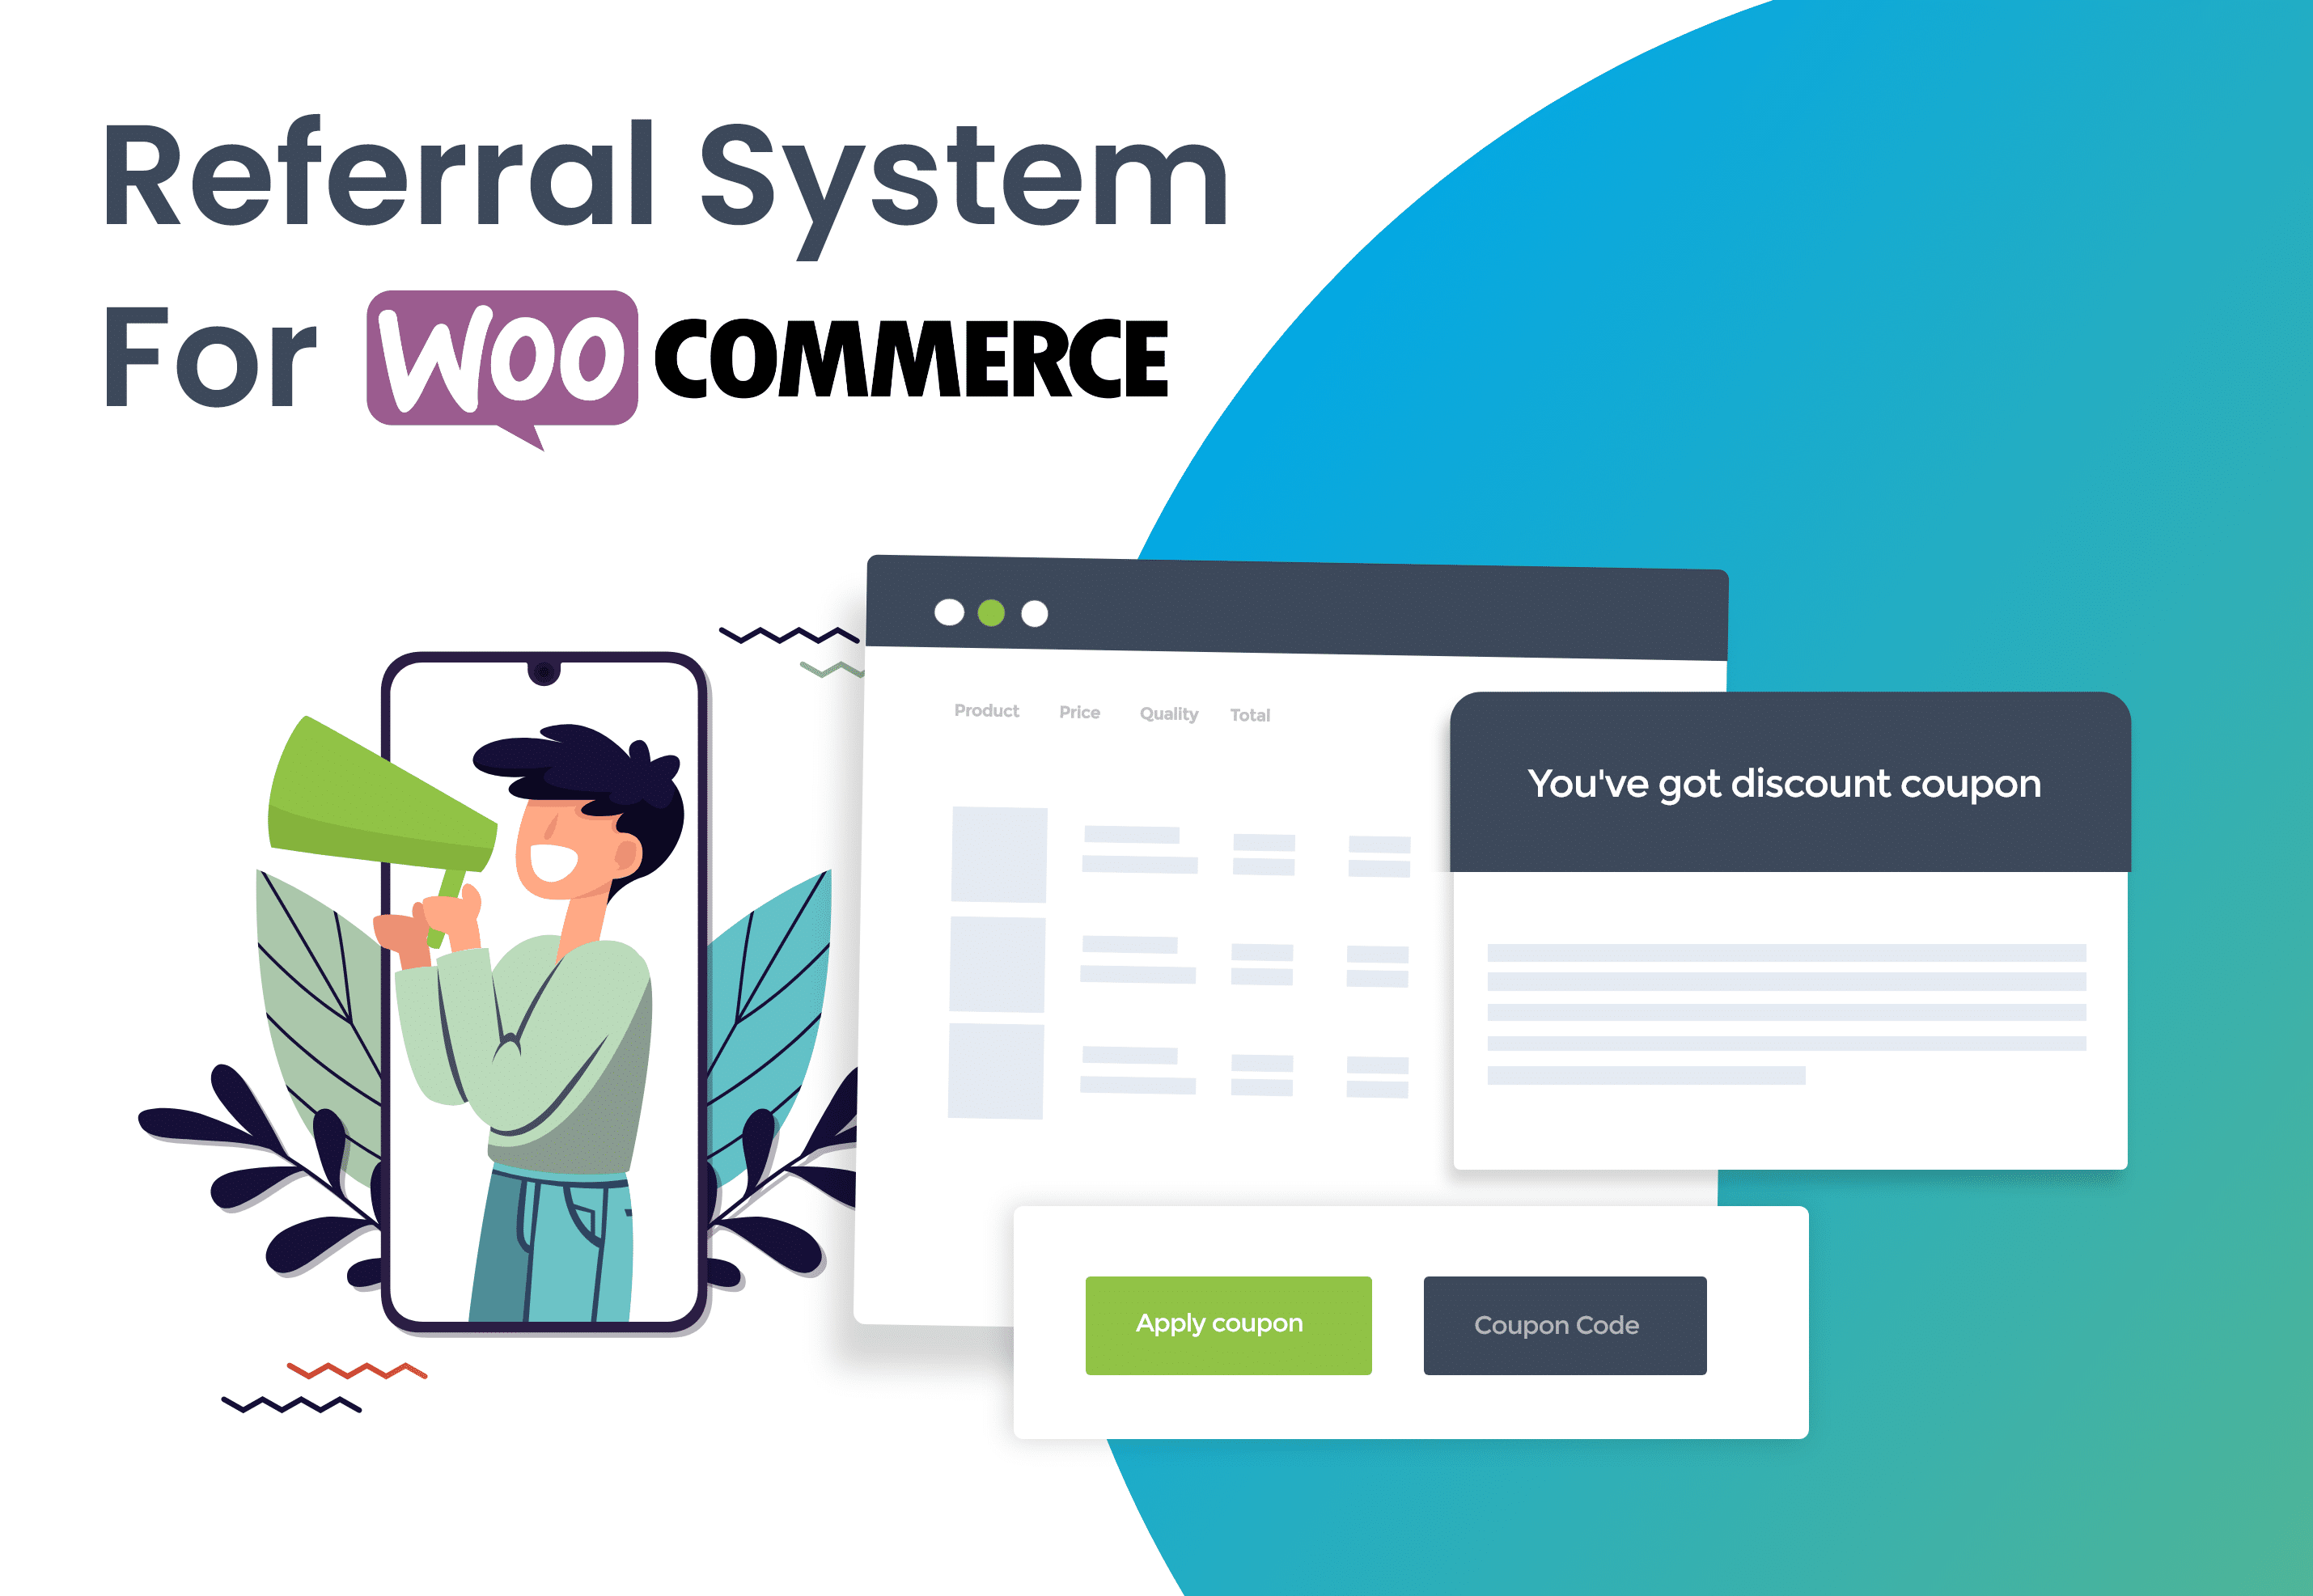 Referral System for Woocommerce